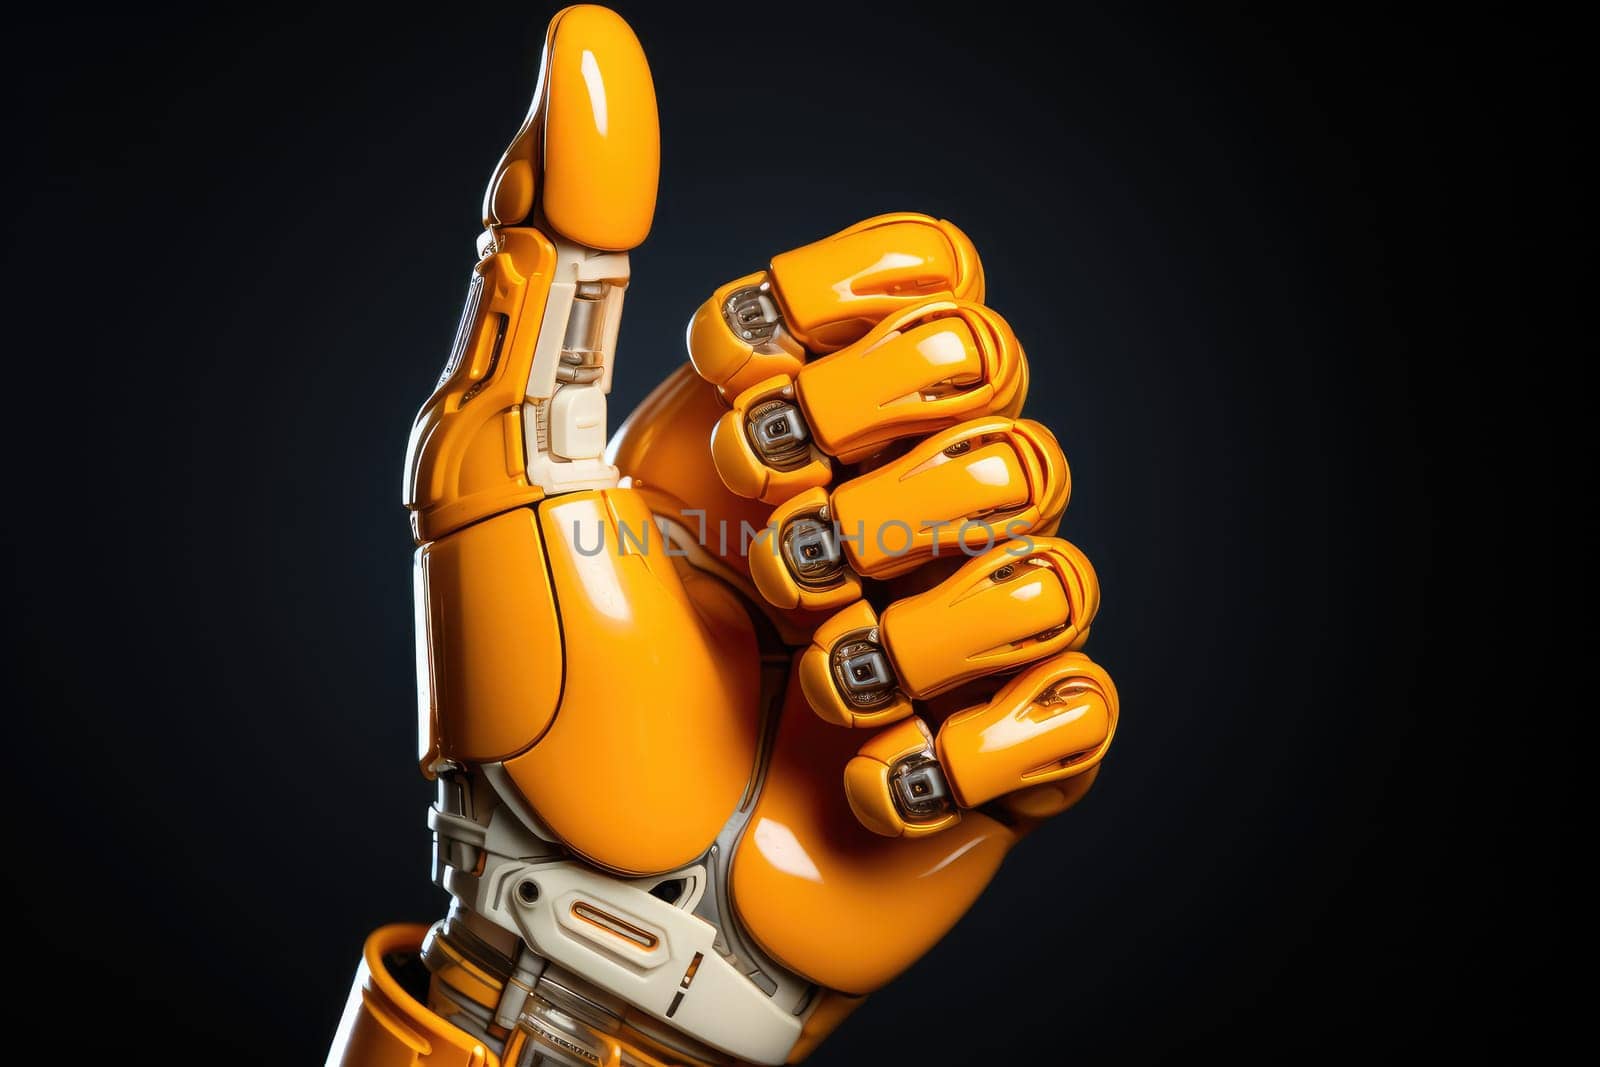 AI Robotic Arm in Support Gesture by Yurich32